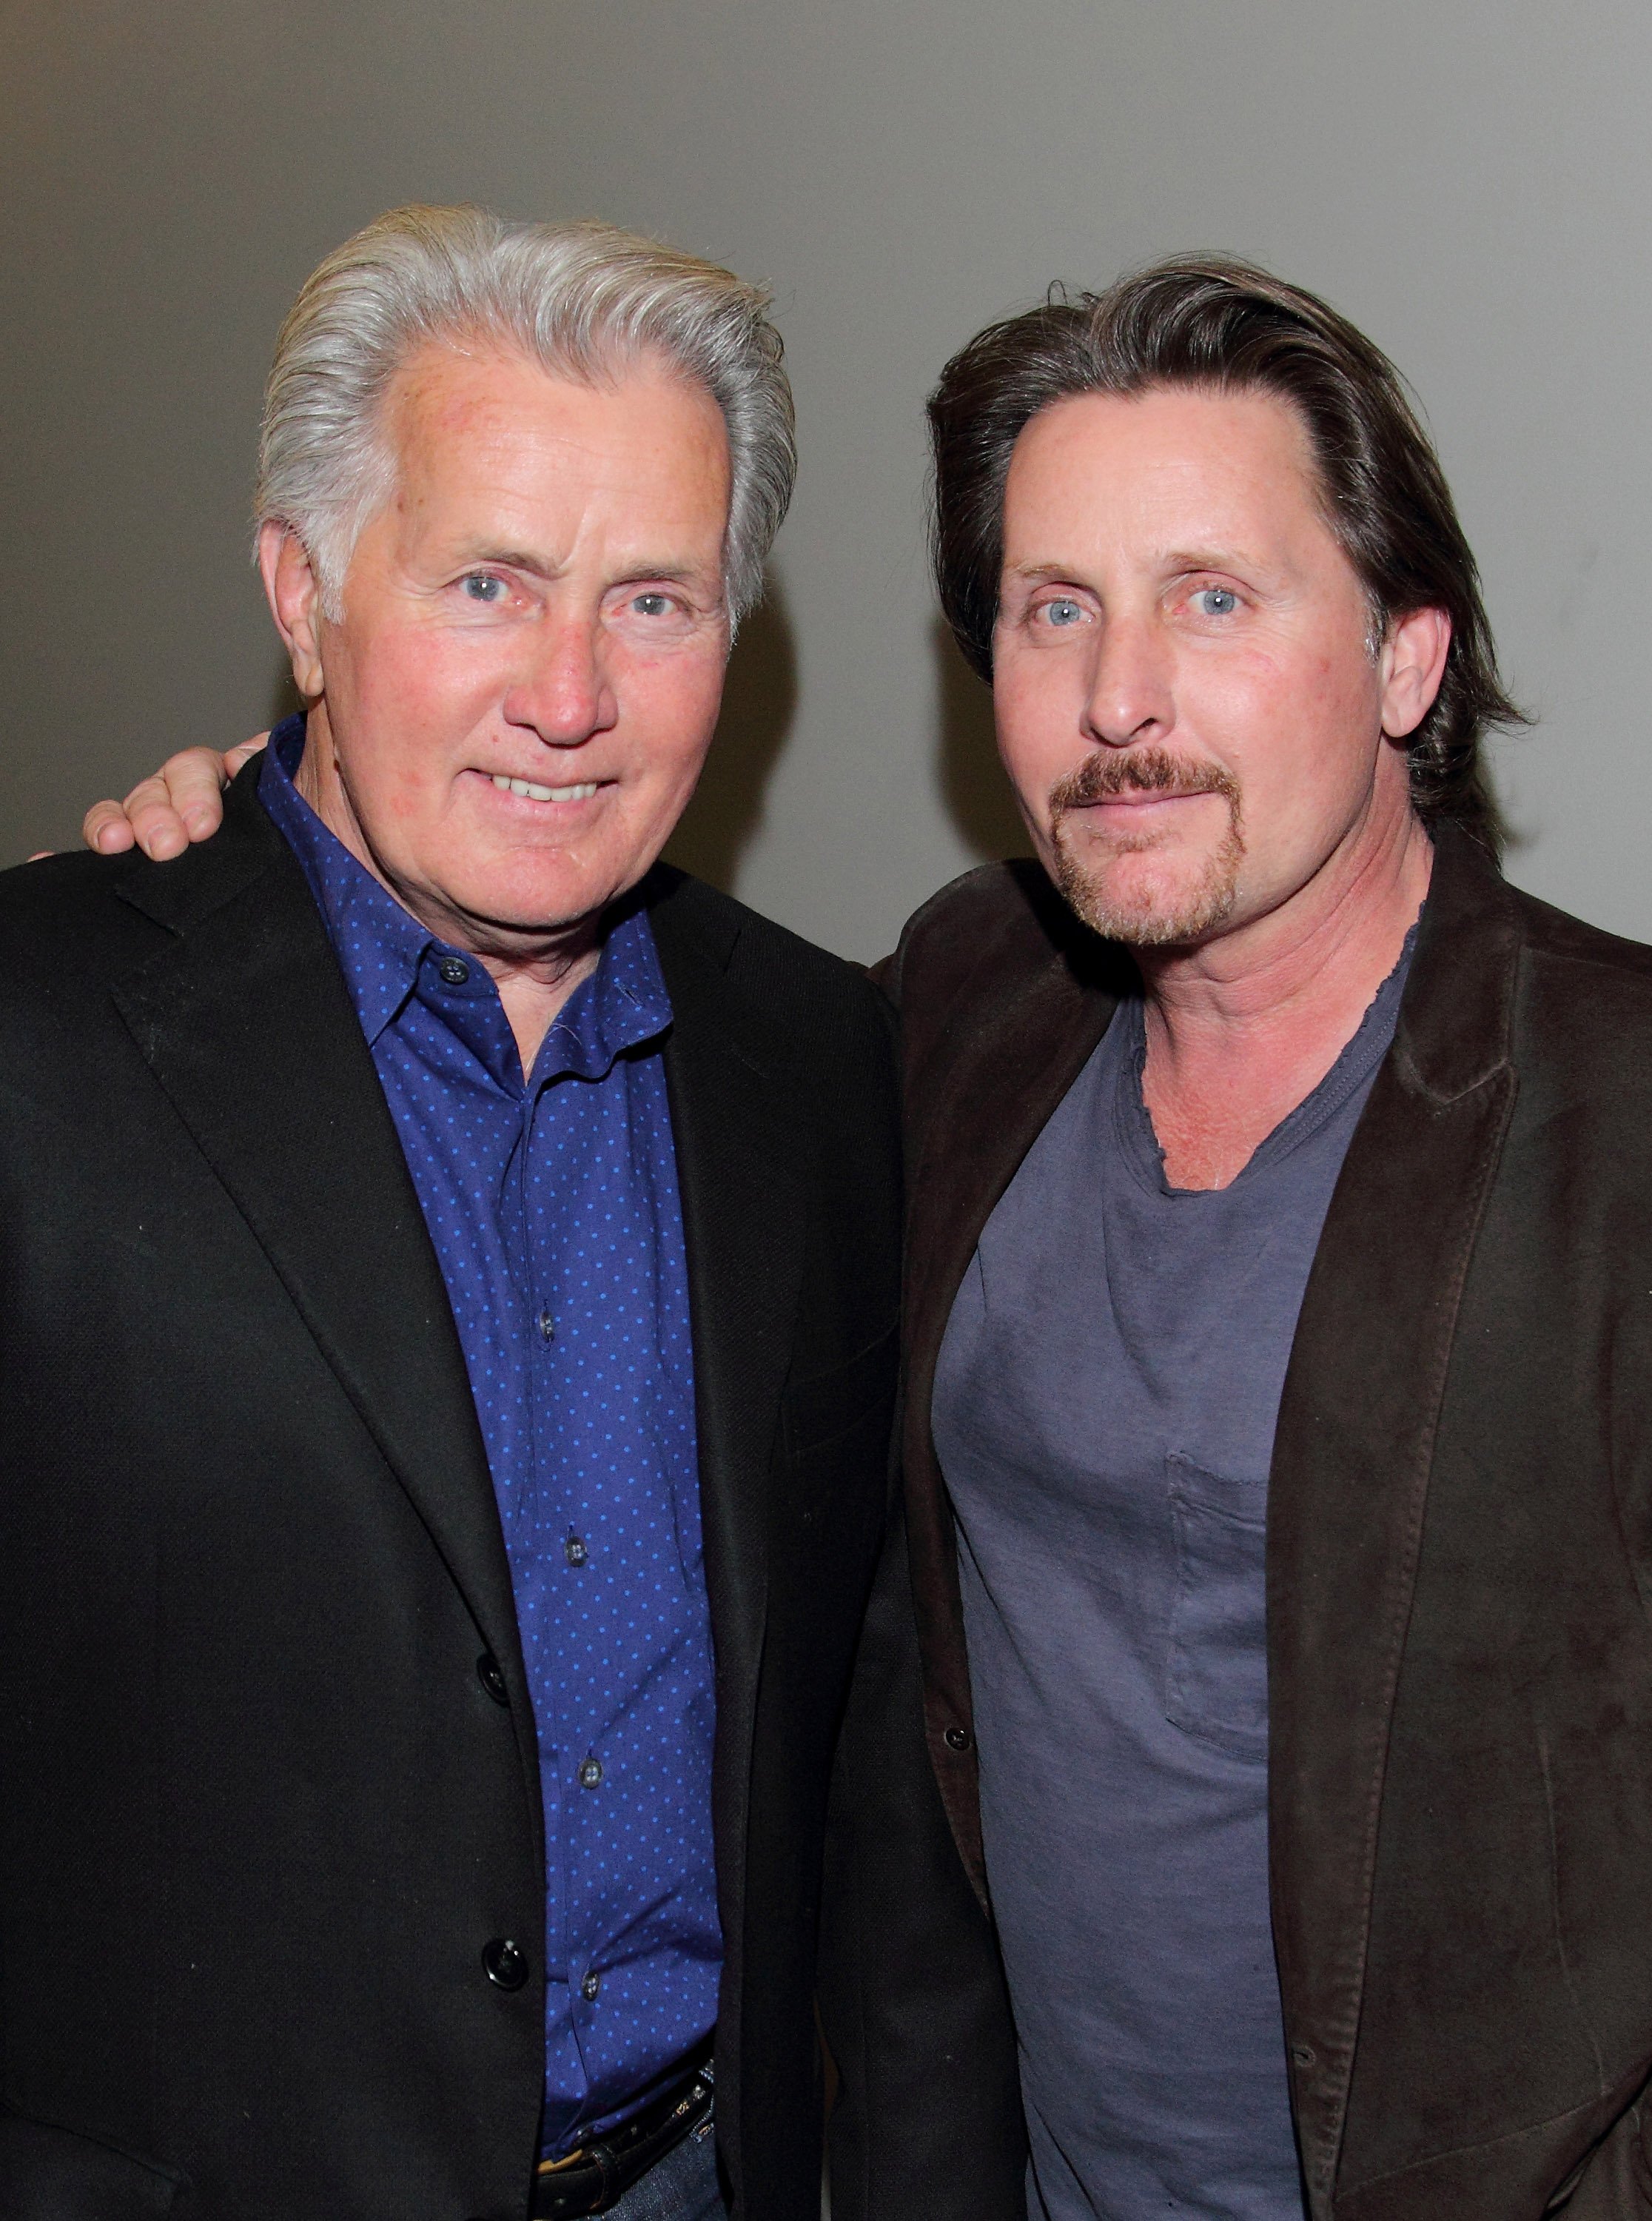 Martin Sheen and Emilio Estevez in Los Angeles in 2011. | Source: Getty Images